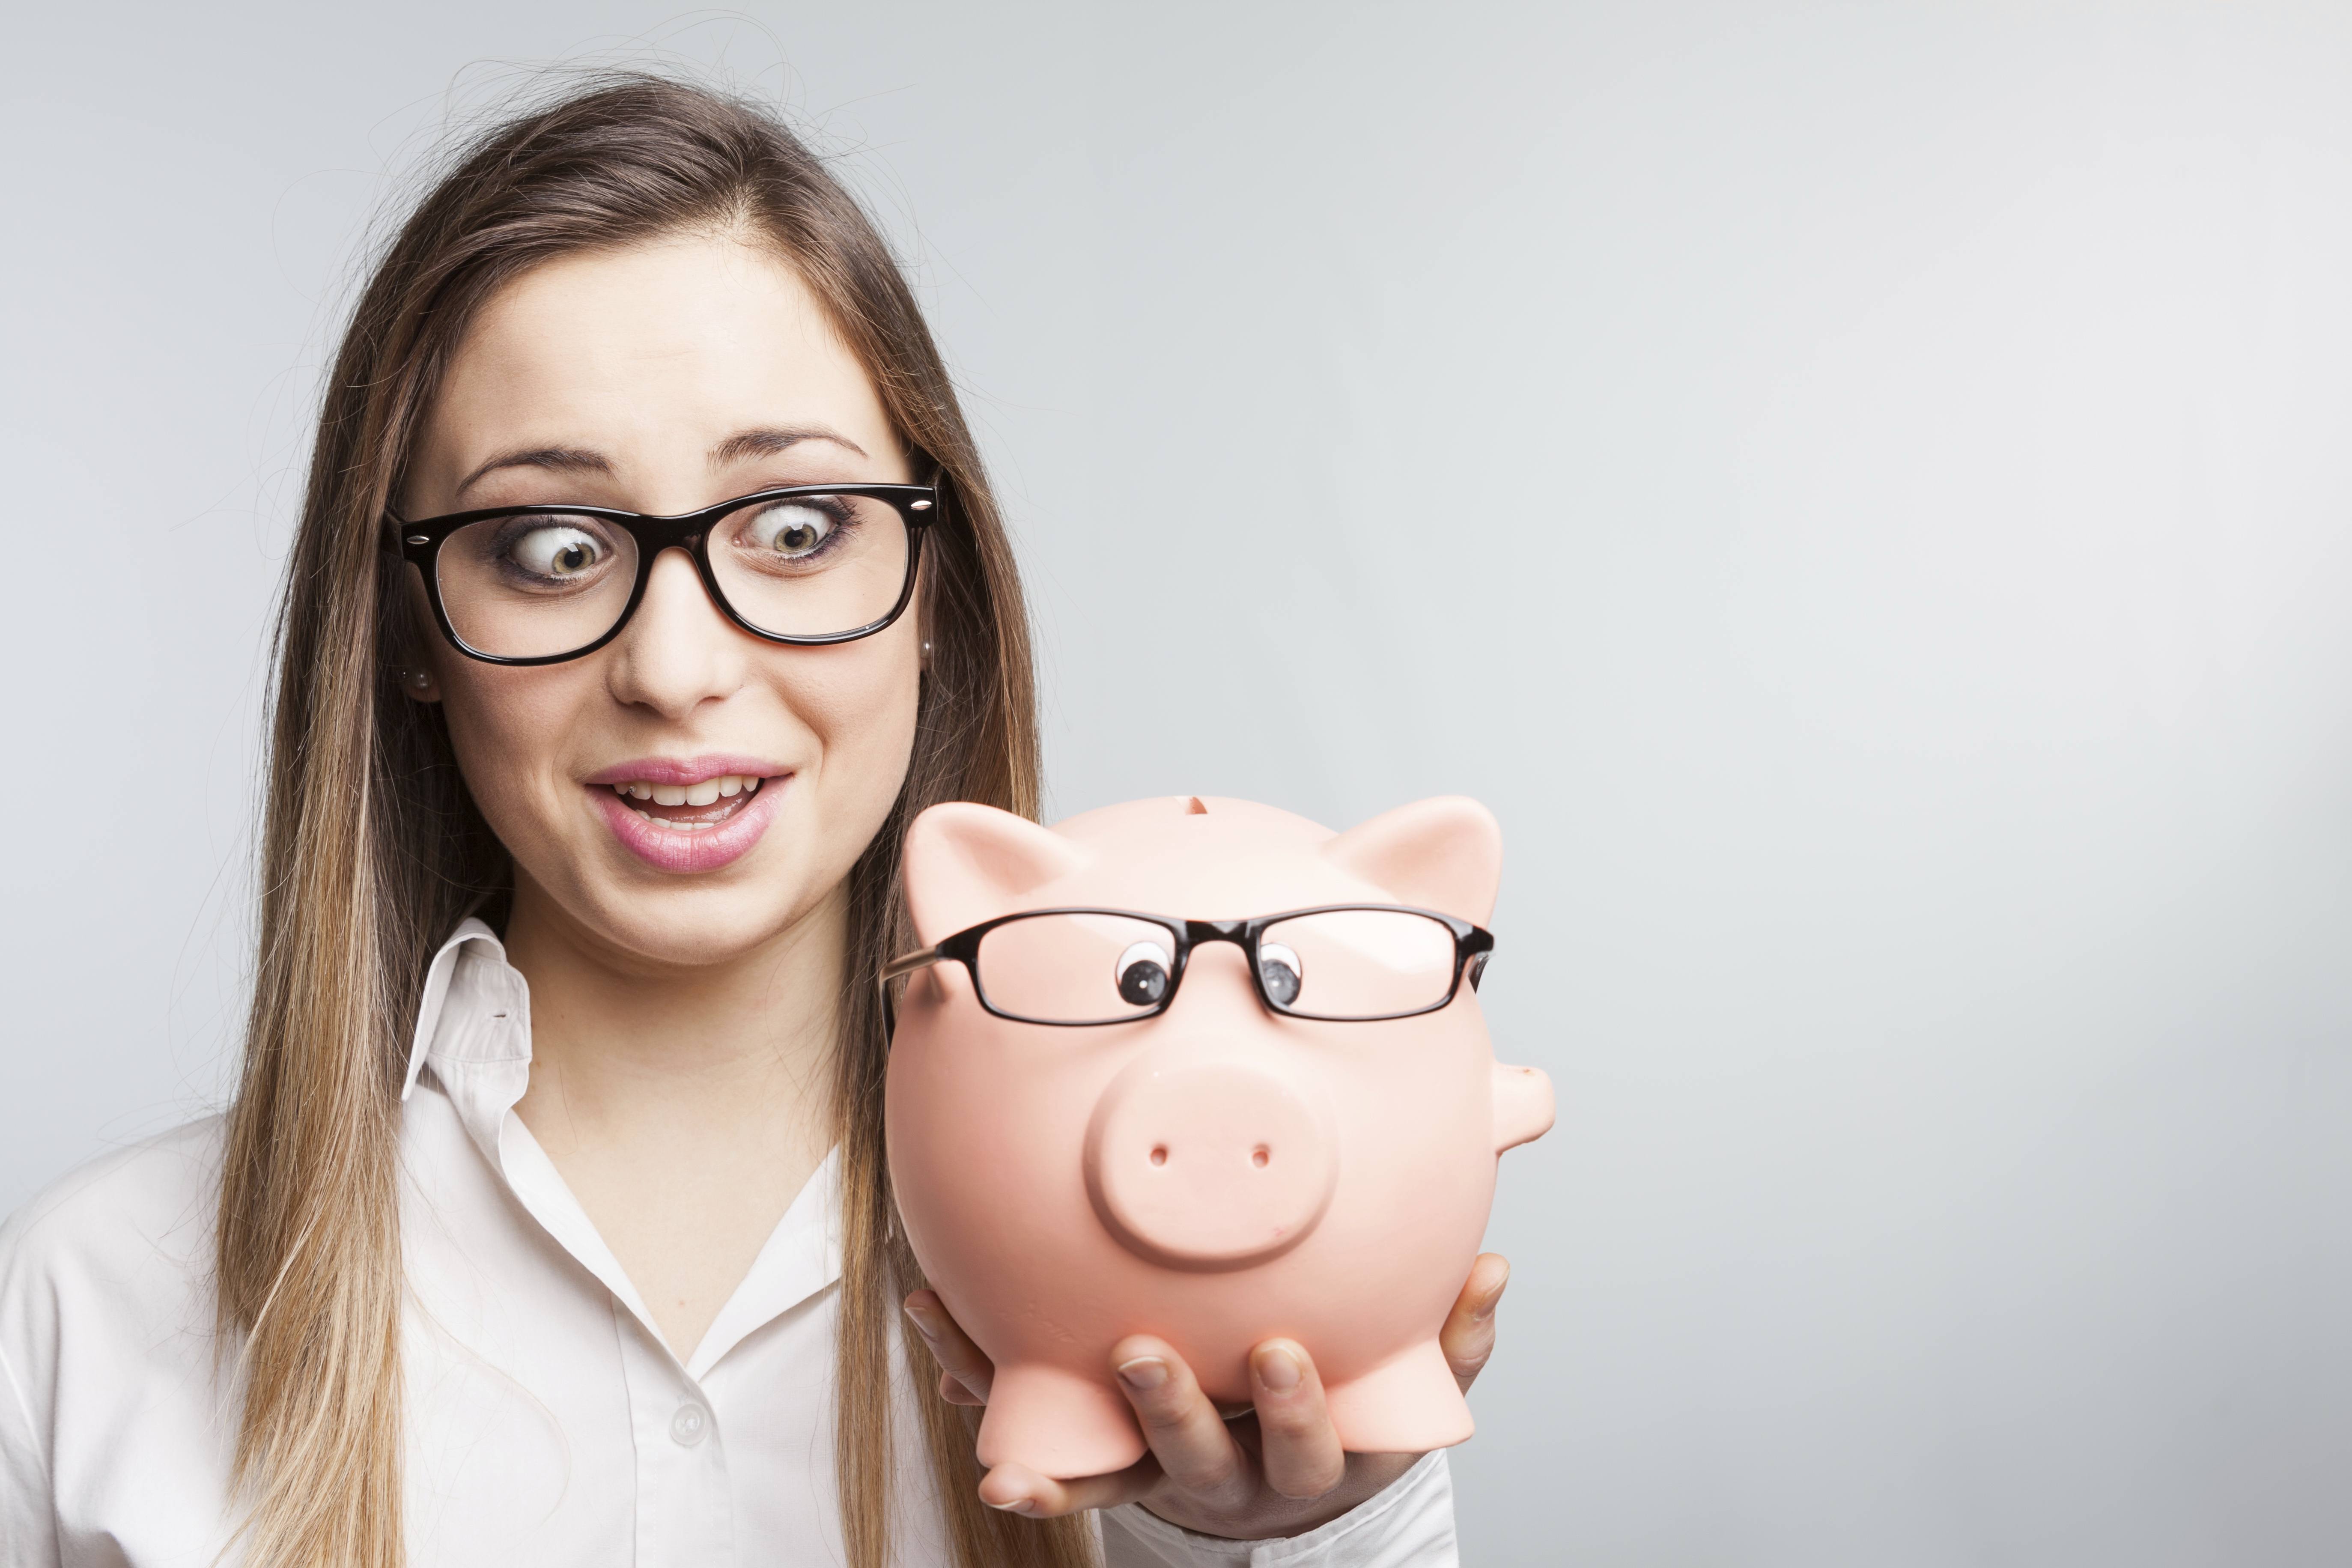 18 Things Financially Mature People Don’t Do